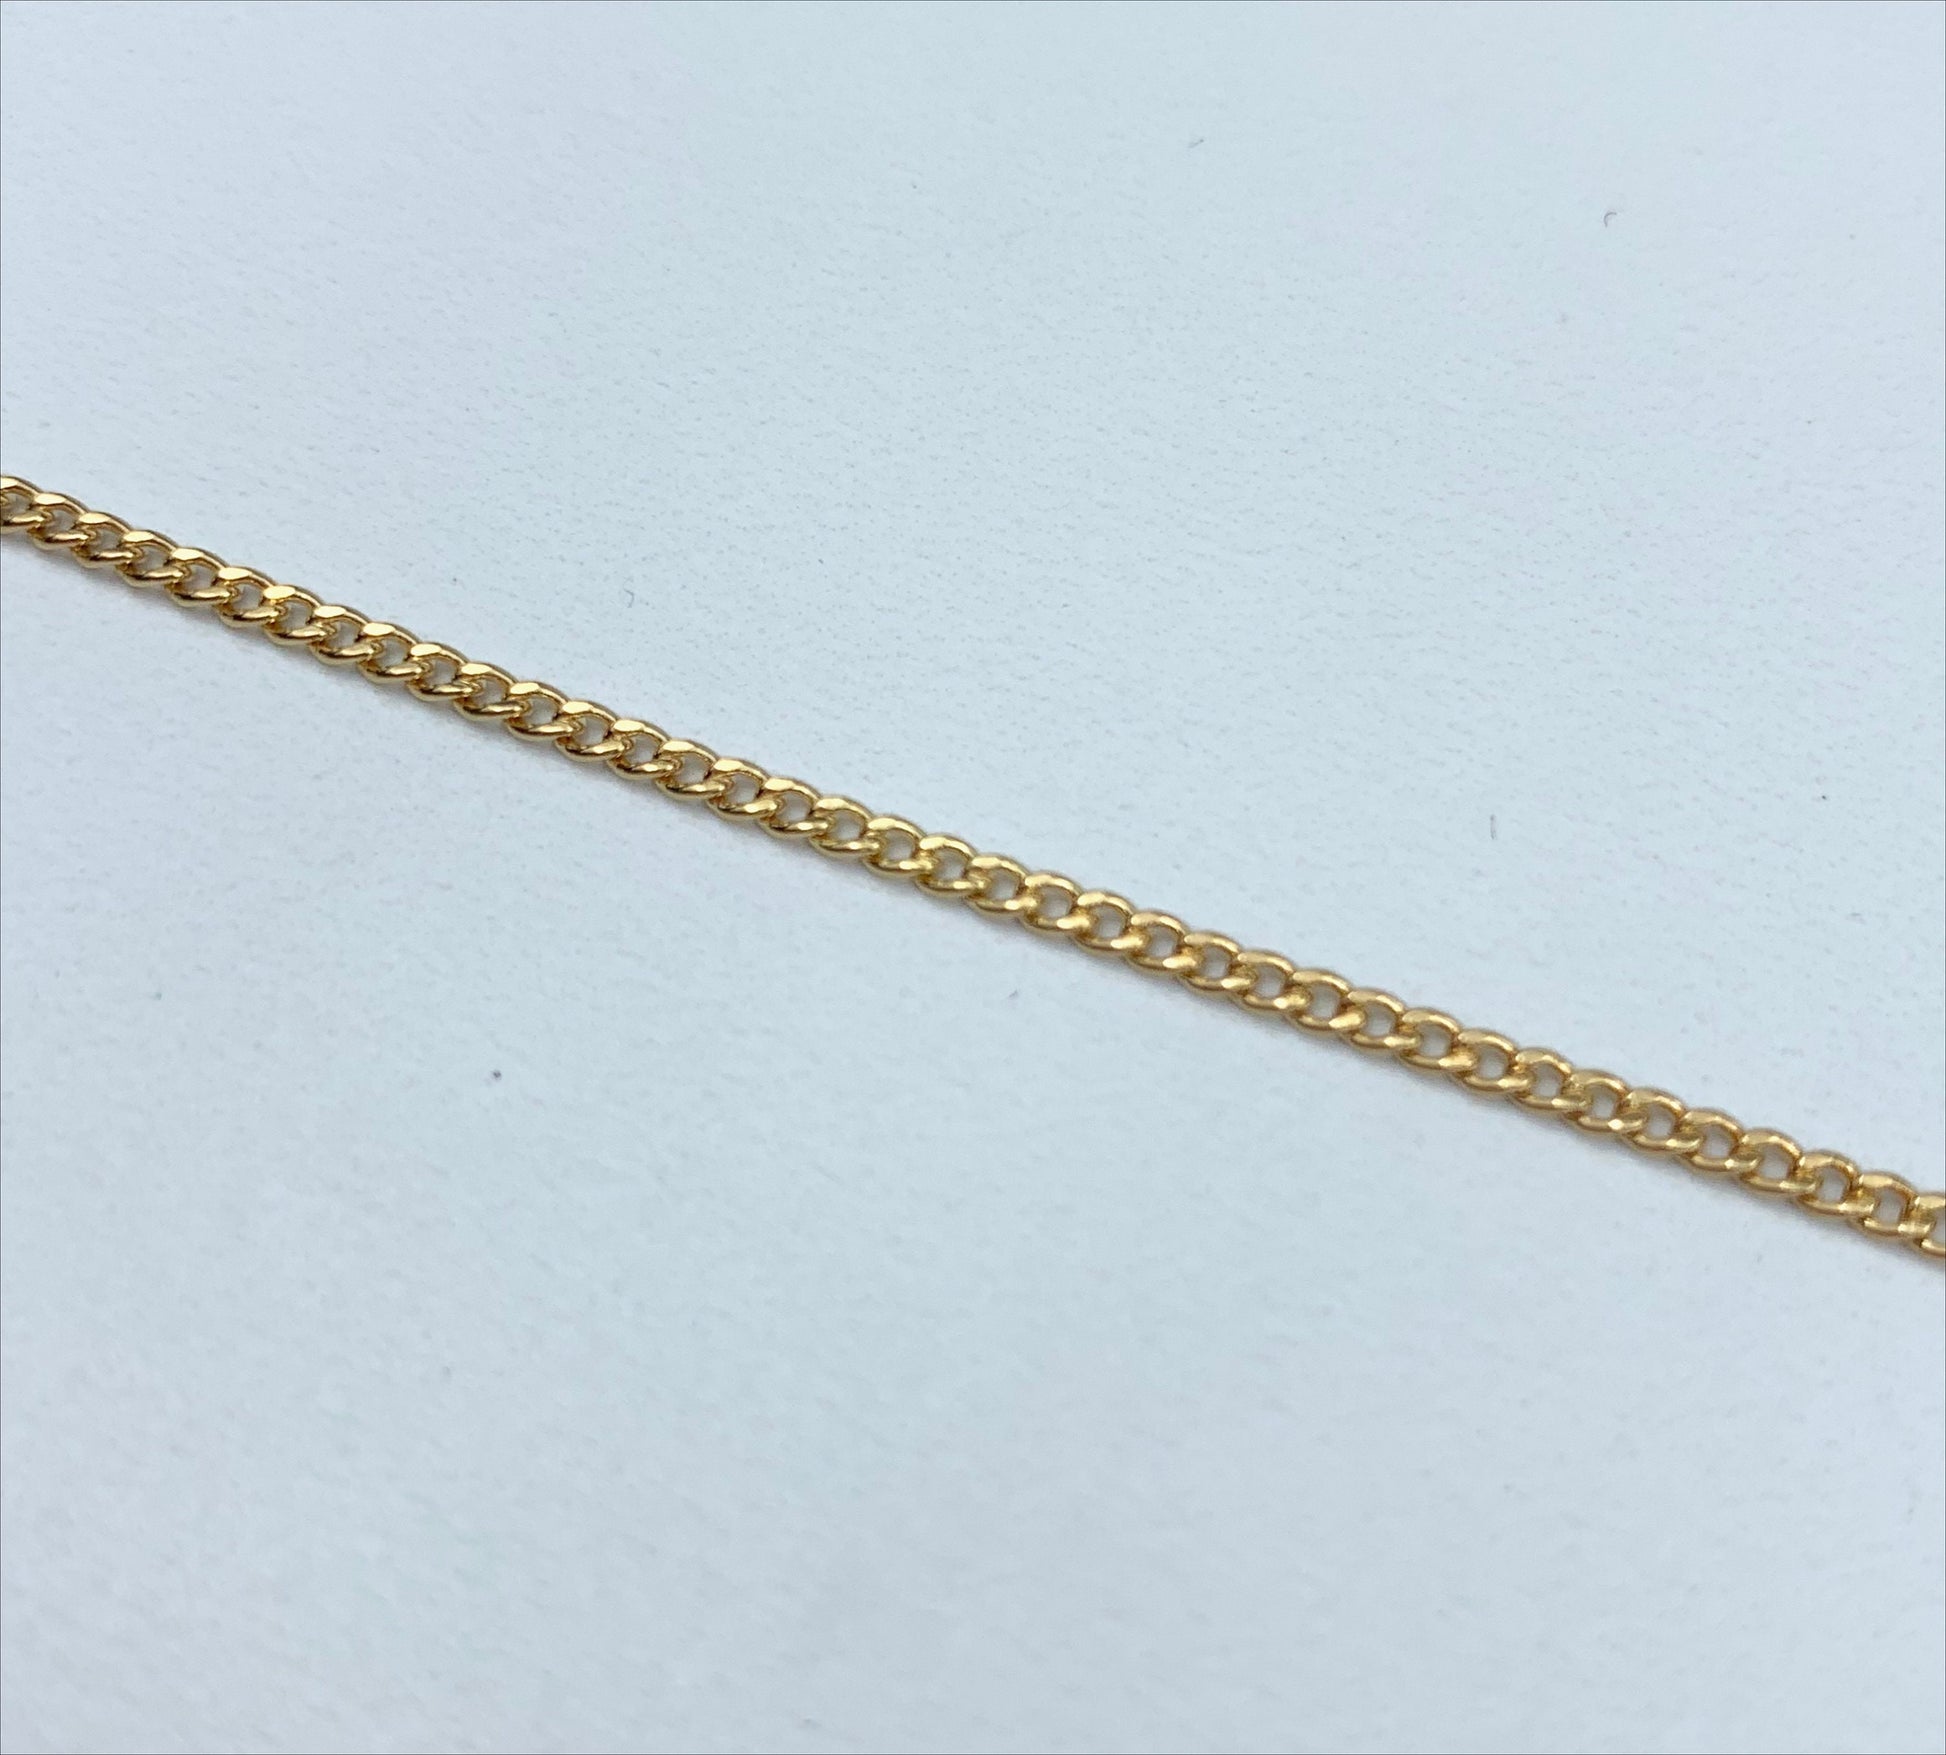 18k Gold Filled 2mm Cuban Link Chain Key and Balls Charms Anklet Wholesale Jewelry Supplies